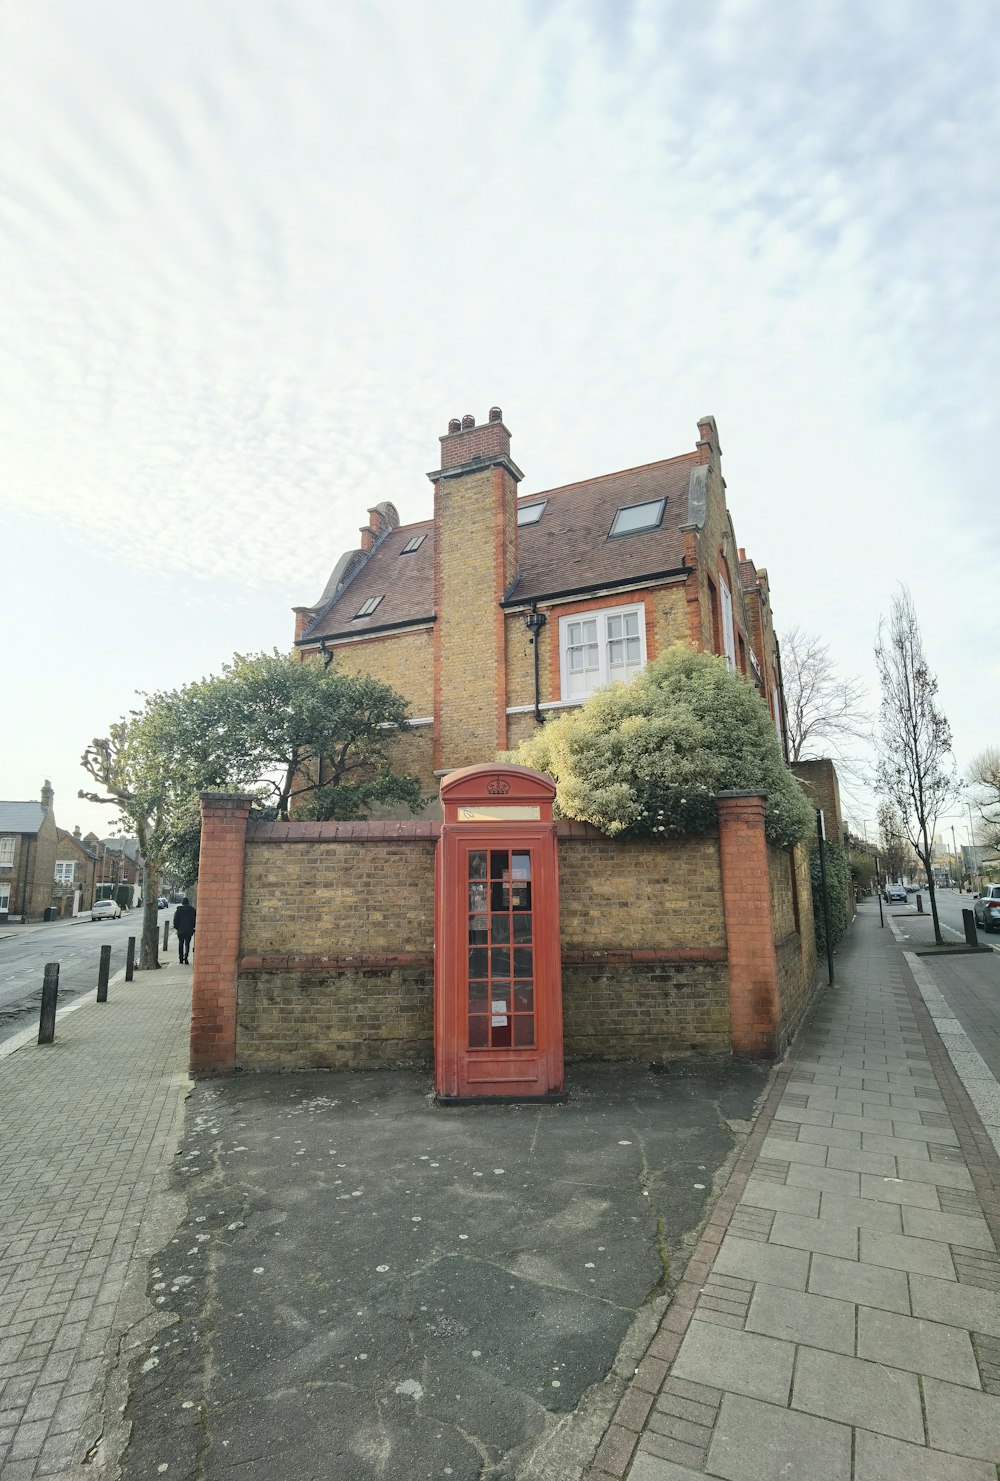 a red phone booth sitting in front of a brick building